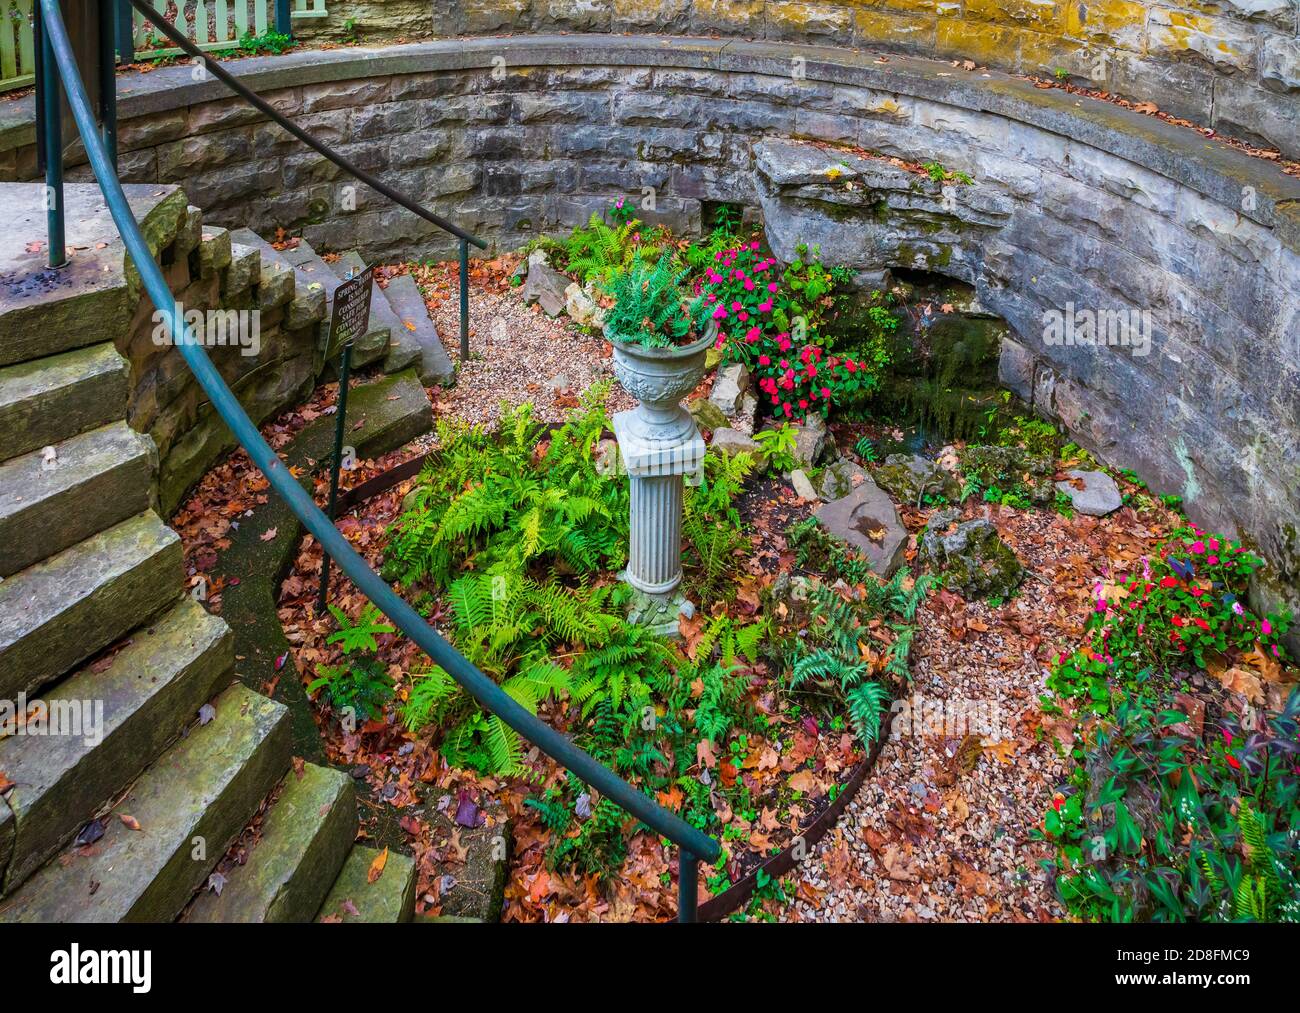 Sweet Spring in Eureka Springs is Sweet Spring Park basin bowl collecting water and the beautiful fl Stock Photo